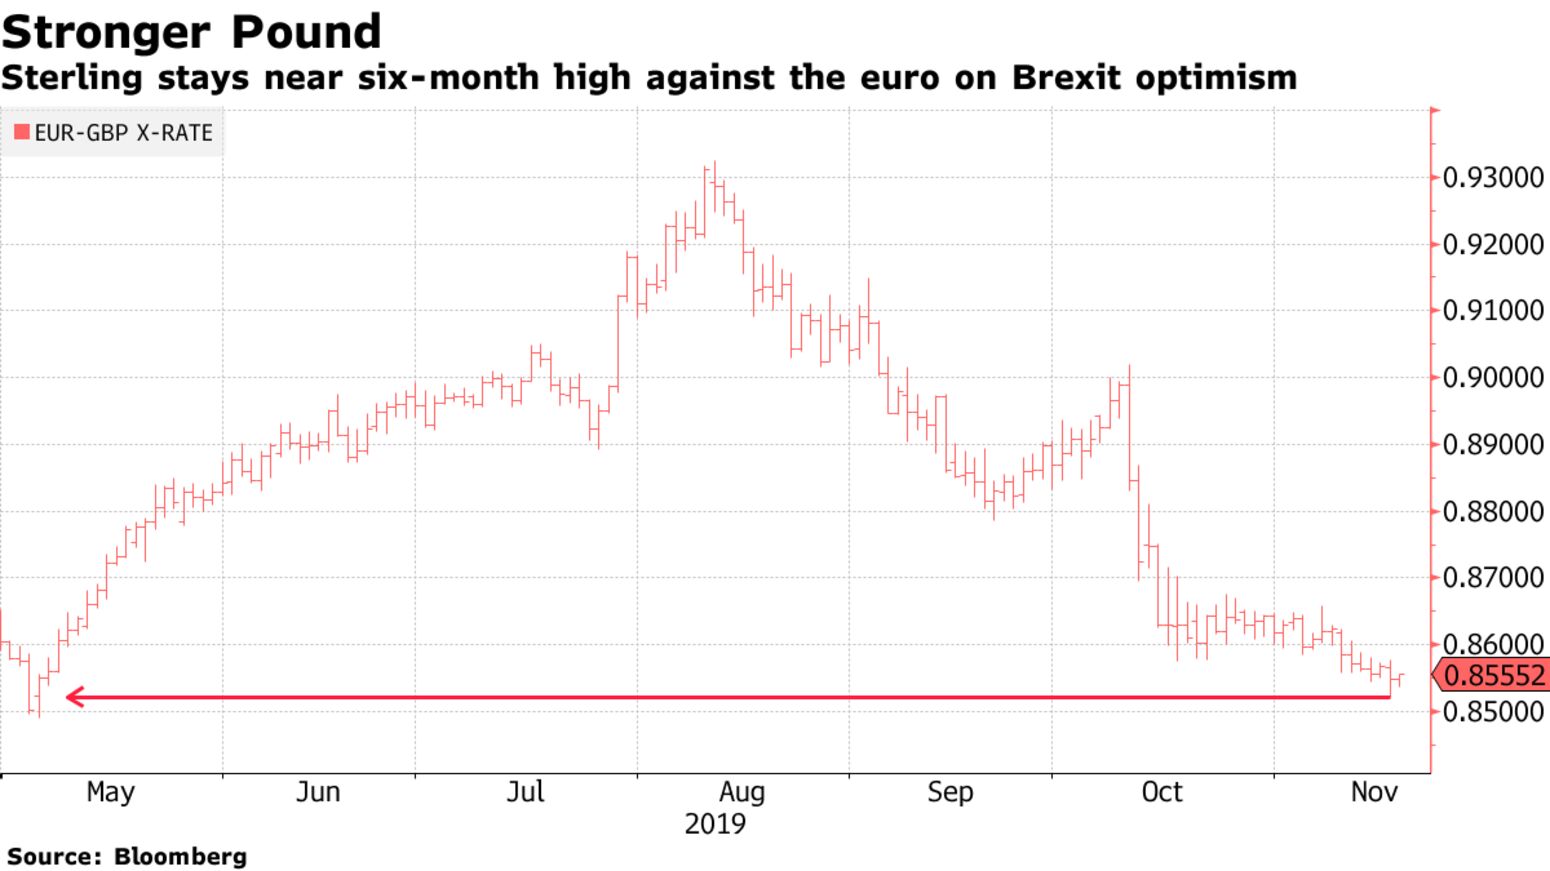 Sterling stays near six-month high against the euro on Brexit optimism